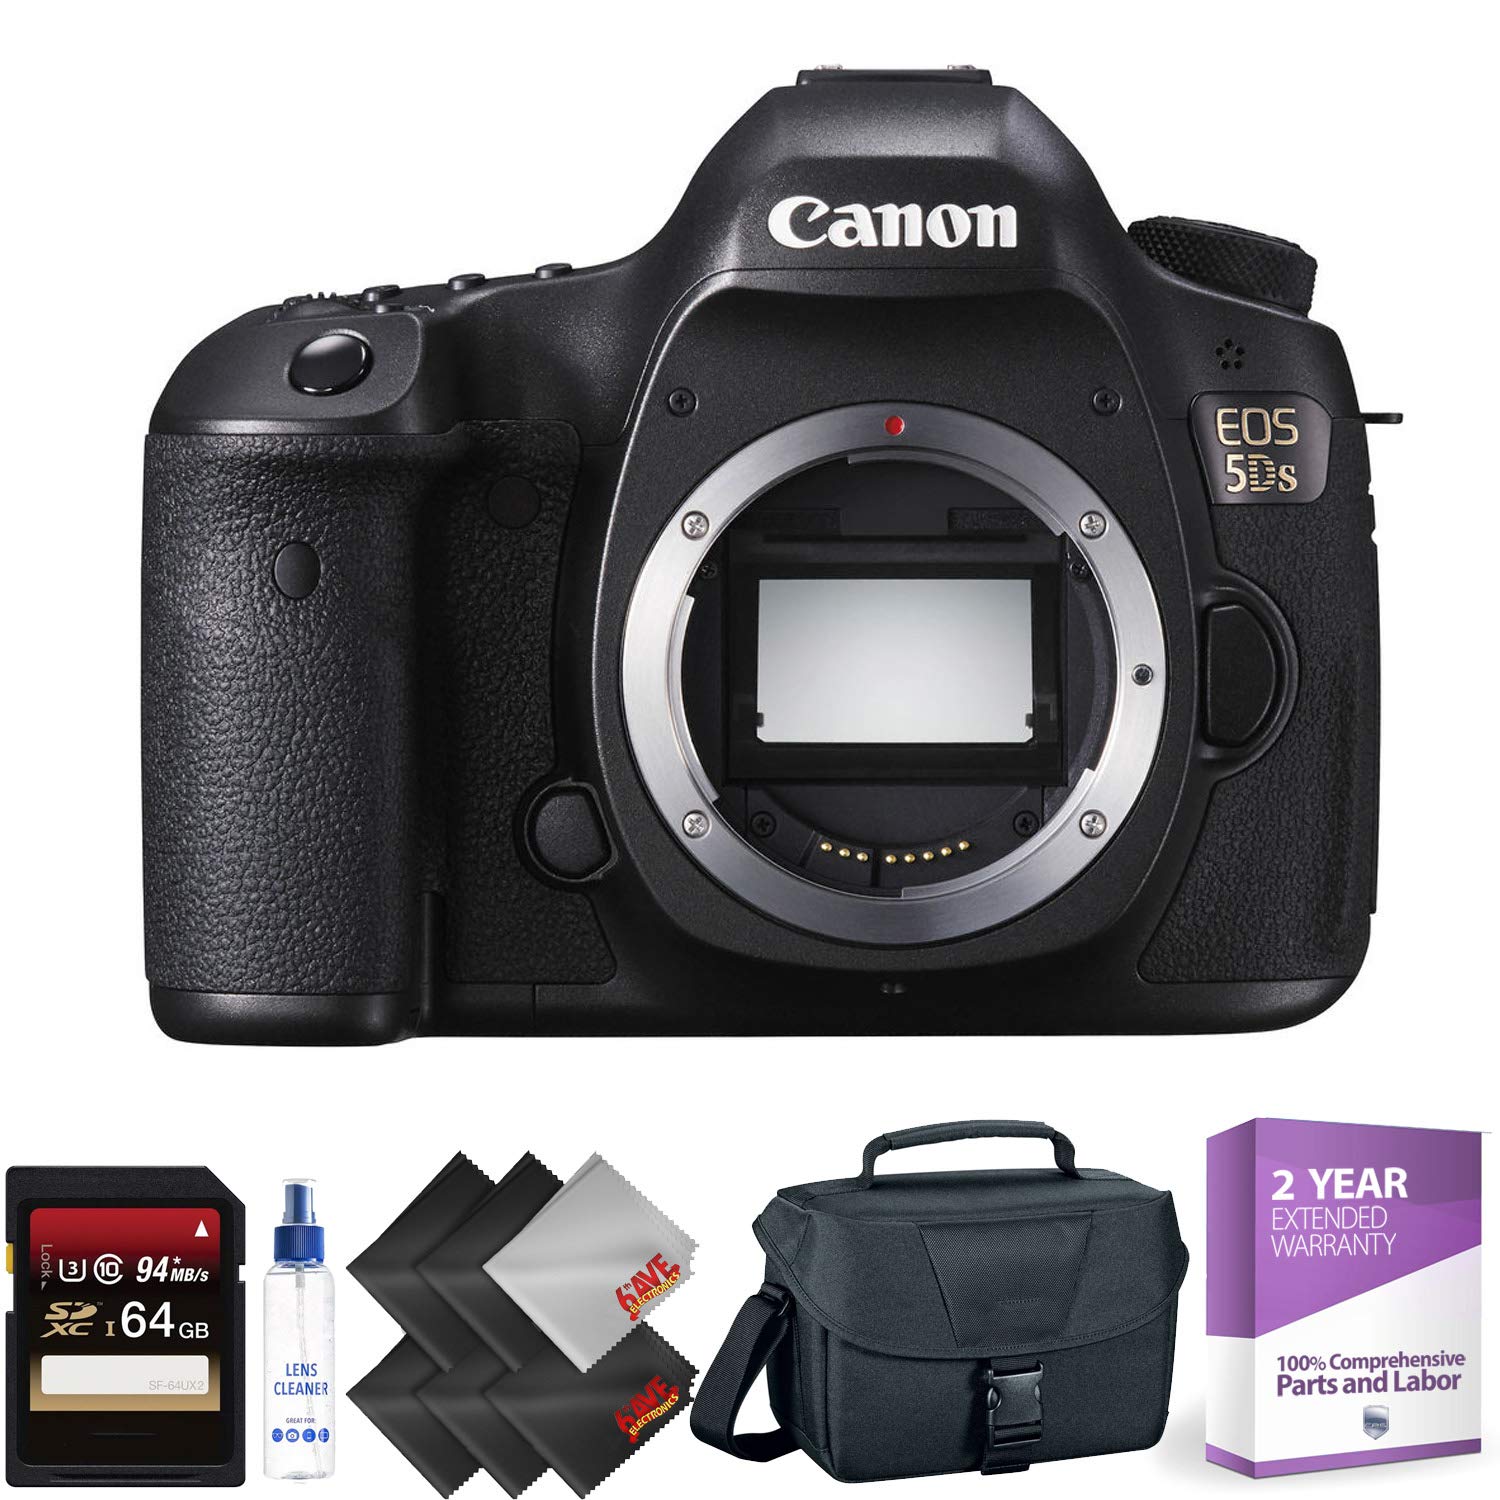 Canon EOS 5DS DSLR Camera (Body Only) + 64GB Memory Card + 1 Year Warranty Ultimate Bundle